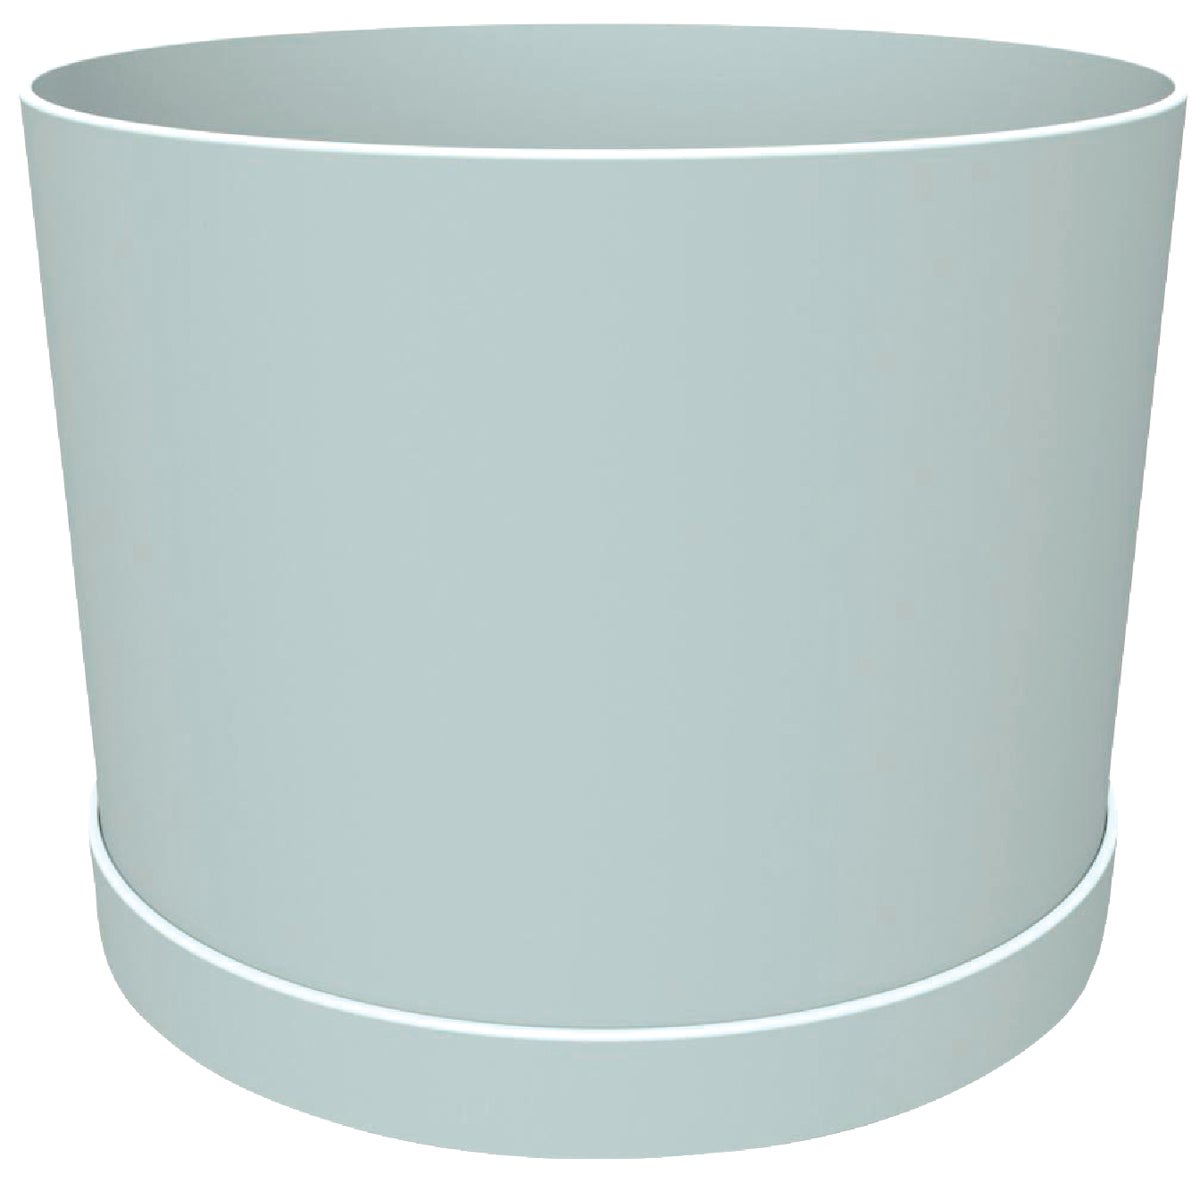 Bloem Mathers Collection 6 In. Misty Blue Plastic Planter